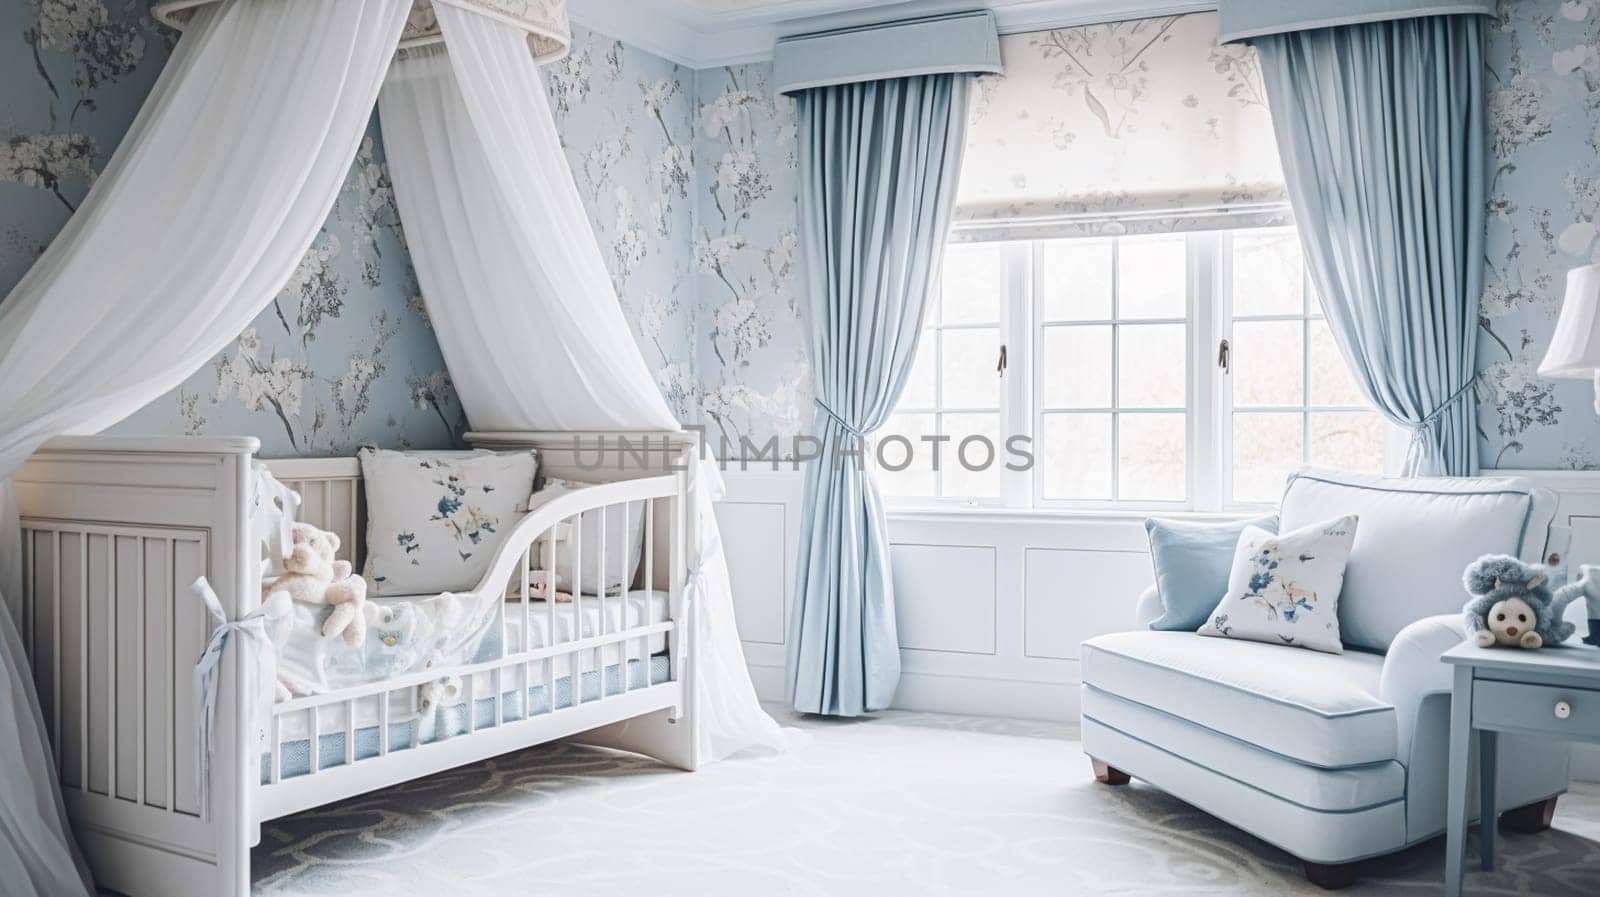 Baby room decor and interior design inspiration in the English countryside style cottage by Anneleven